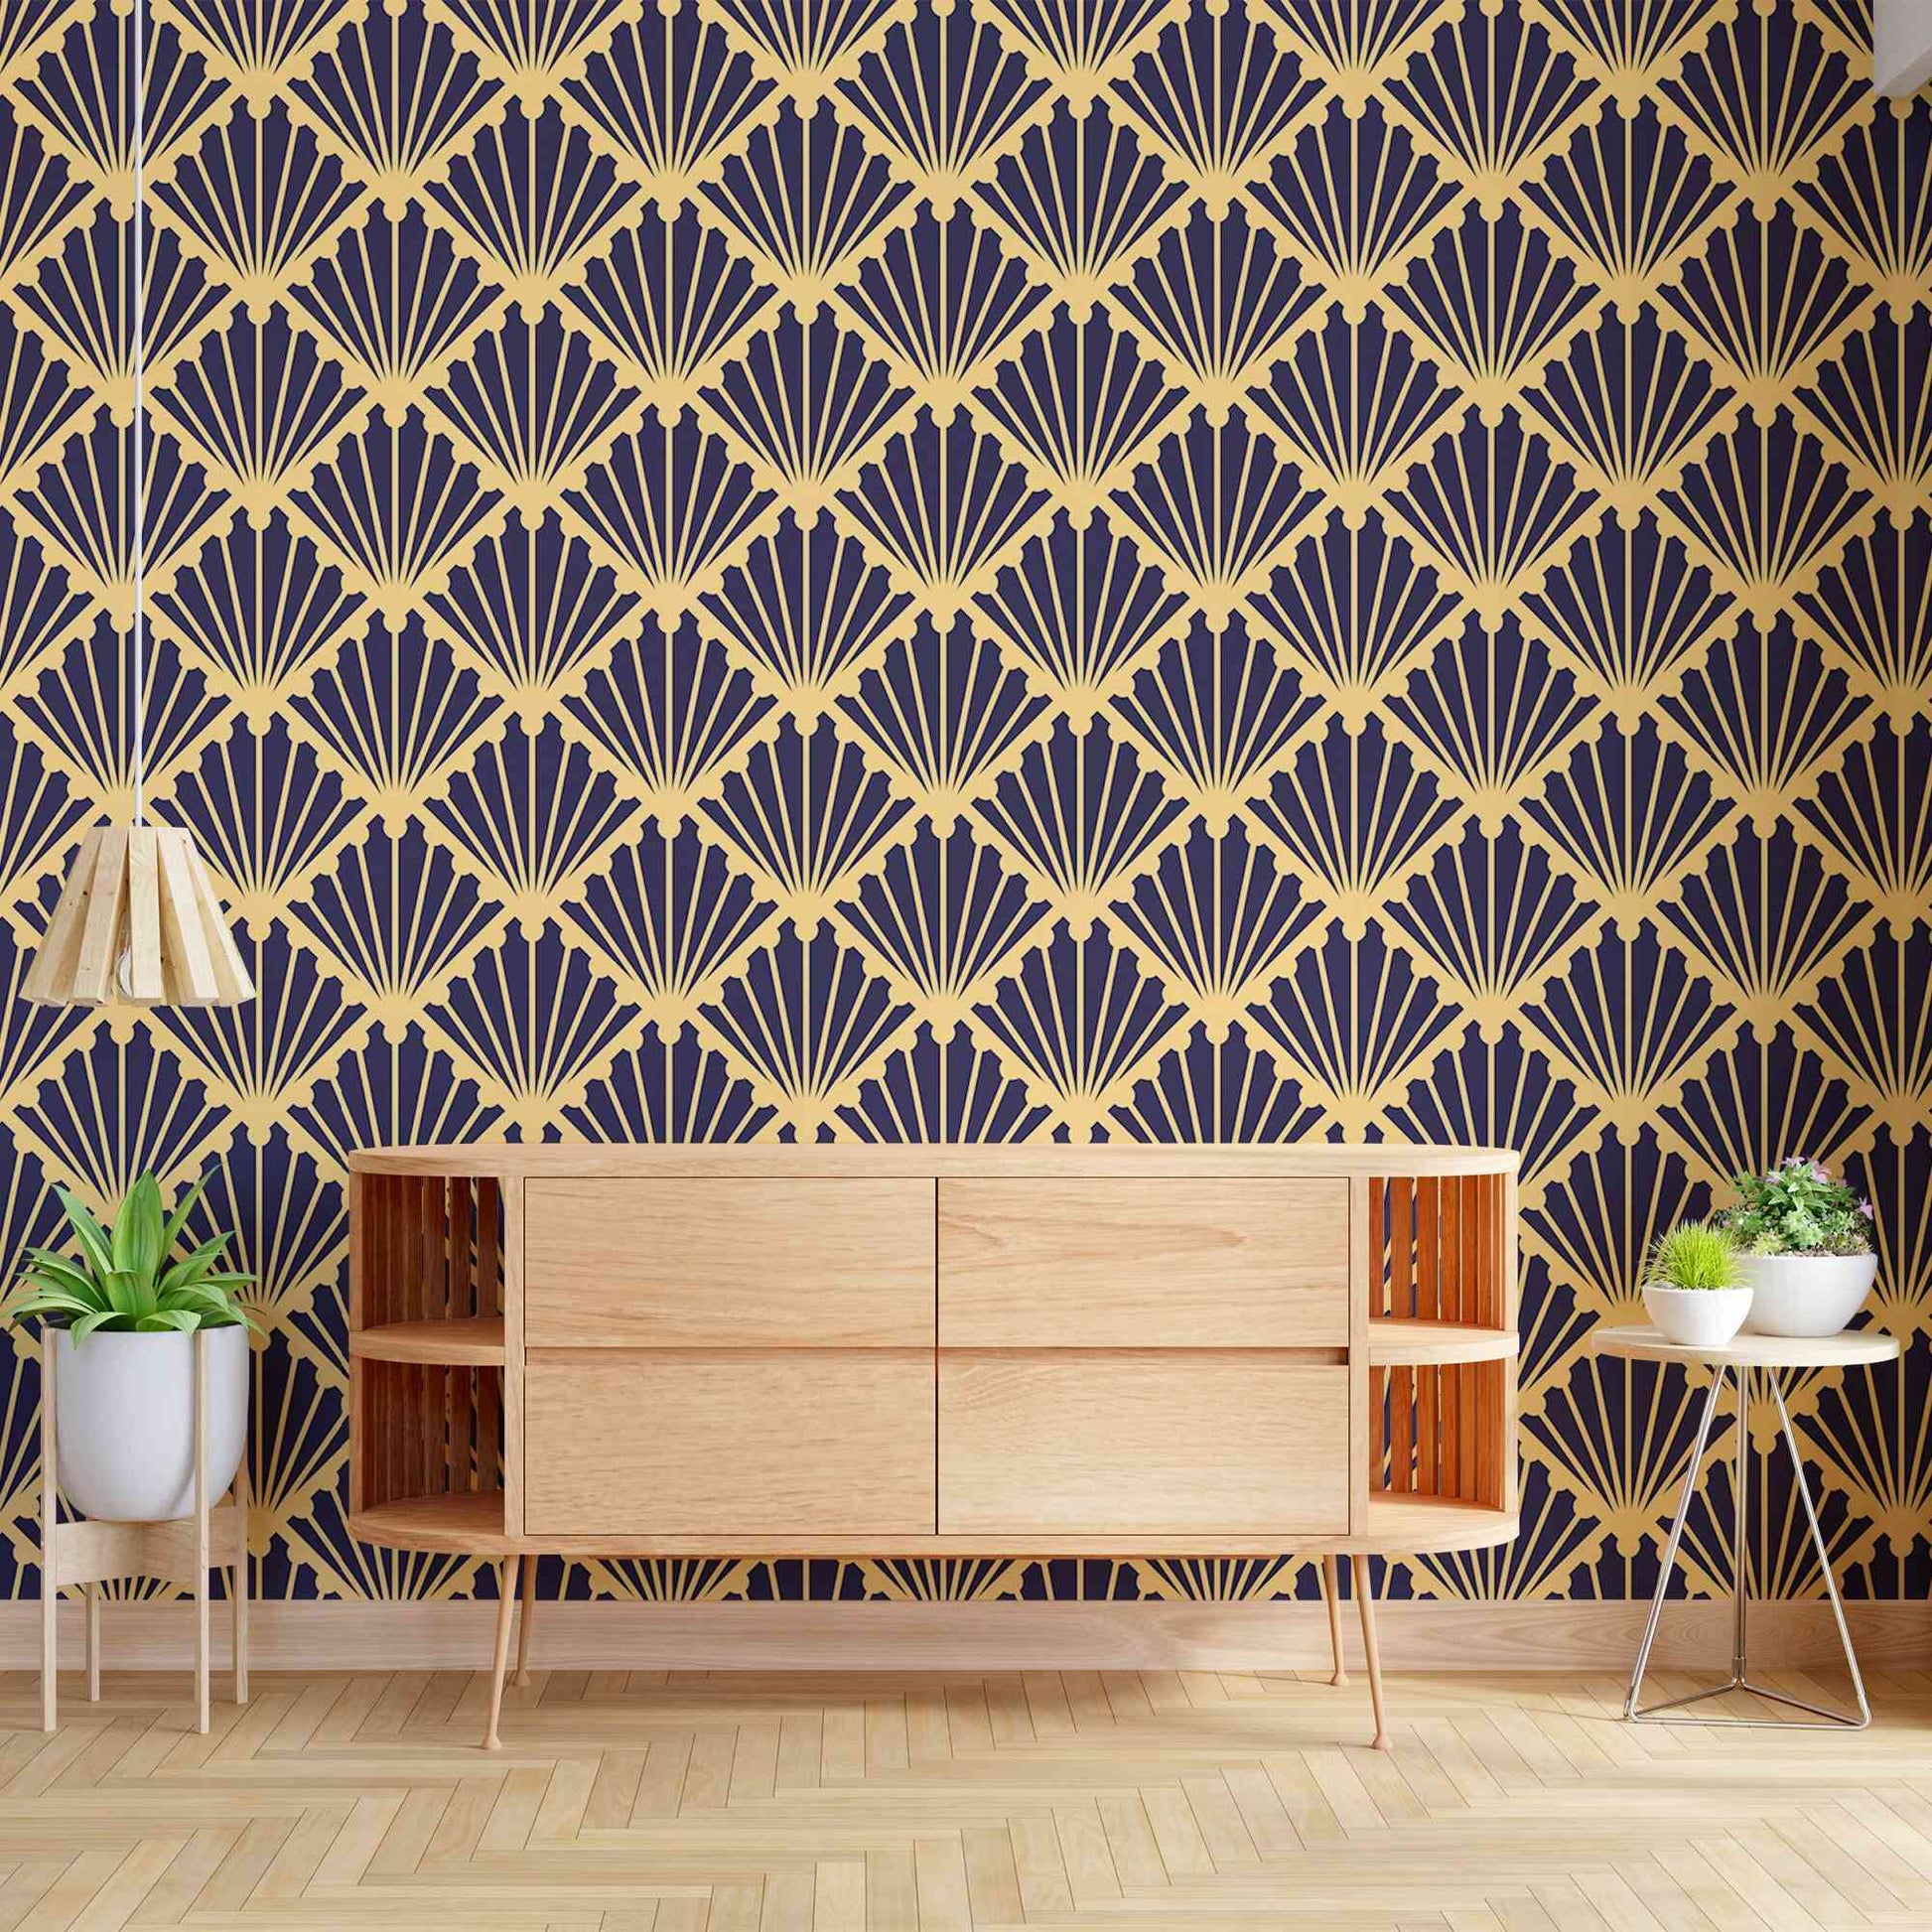 Black with gold murals floral pattern wallpaper adorning a stylish room.